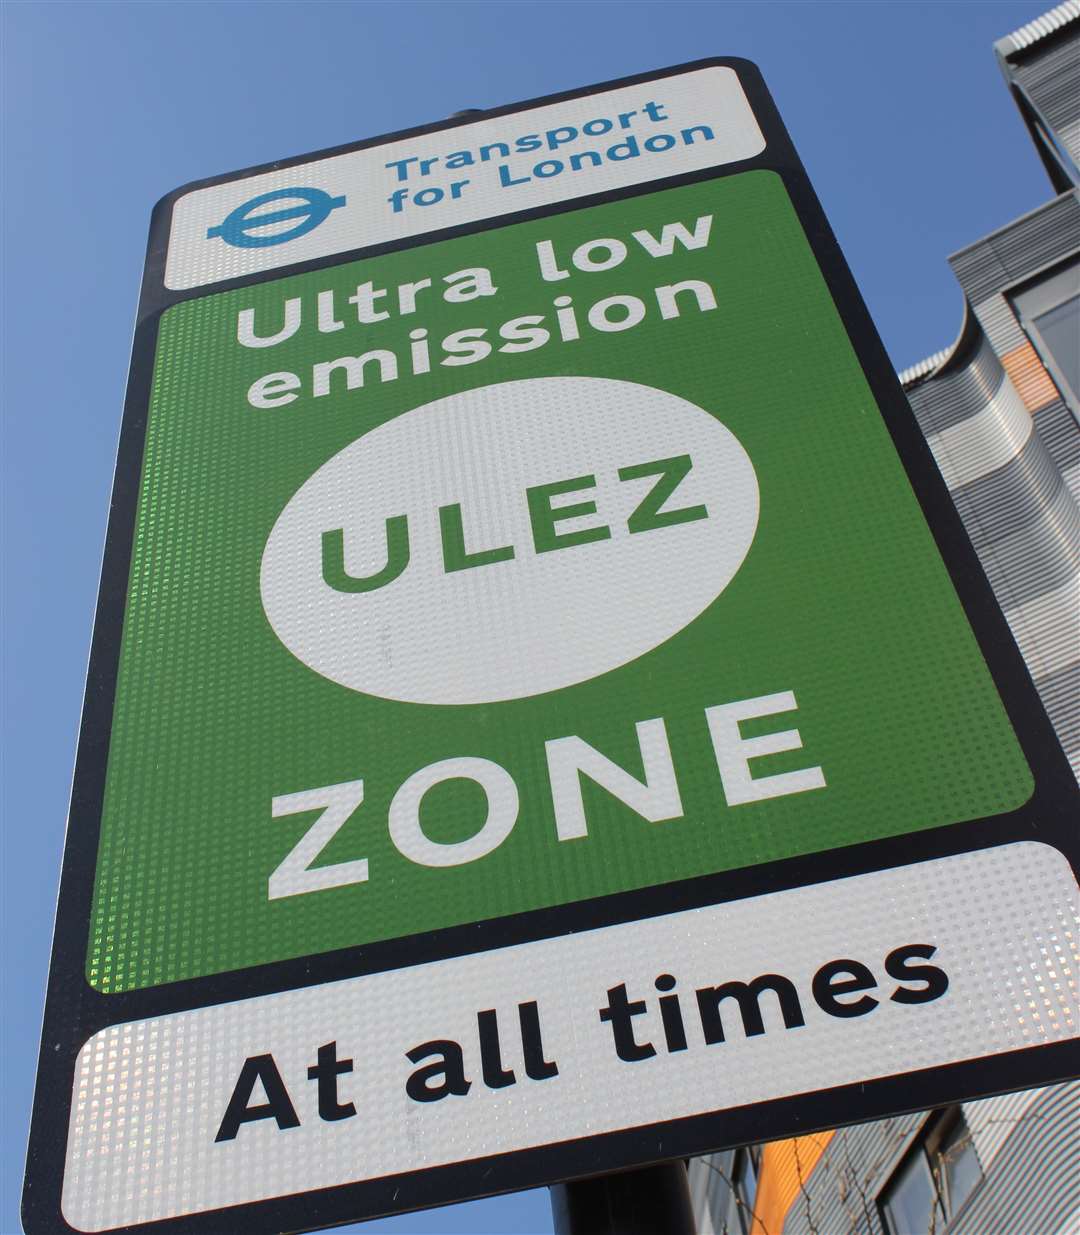 London's Ultra low emission zone has now been expanded.